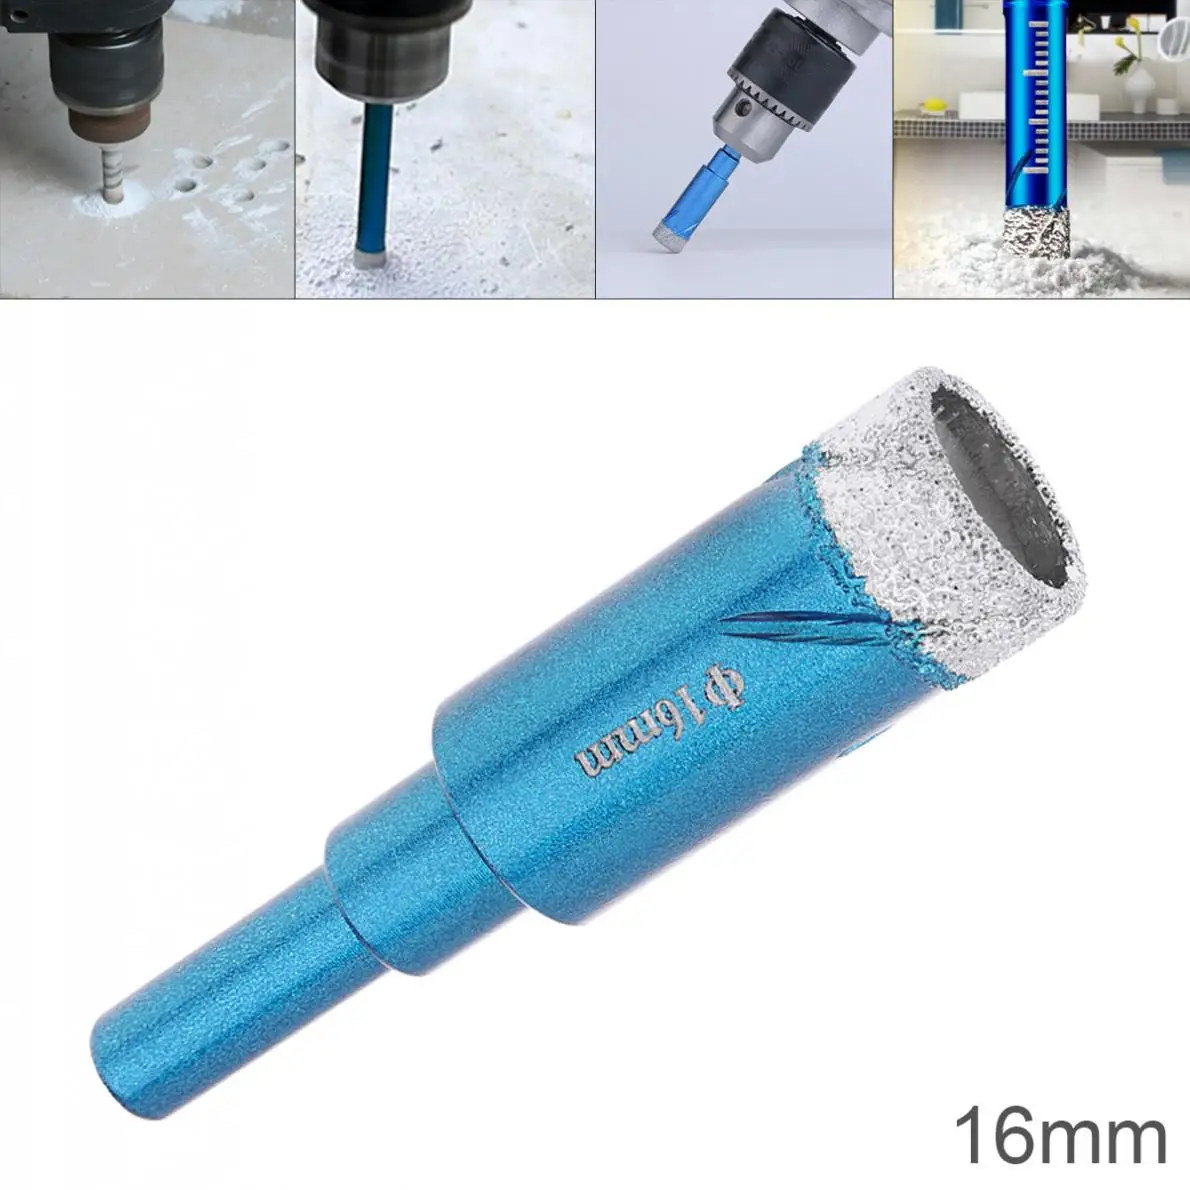 

16mm Perforated Drill Electric Drill Hole Drill Bit Granite Marble Dry Hole Puncher Built-in Cooling Wax